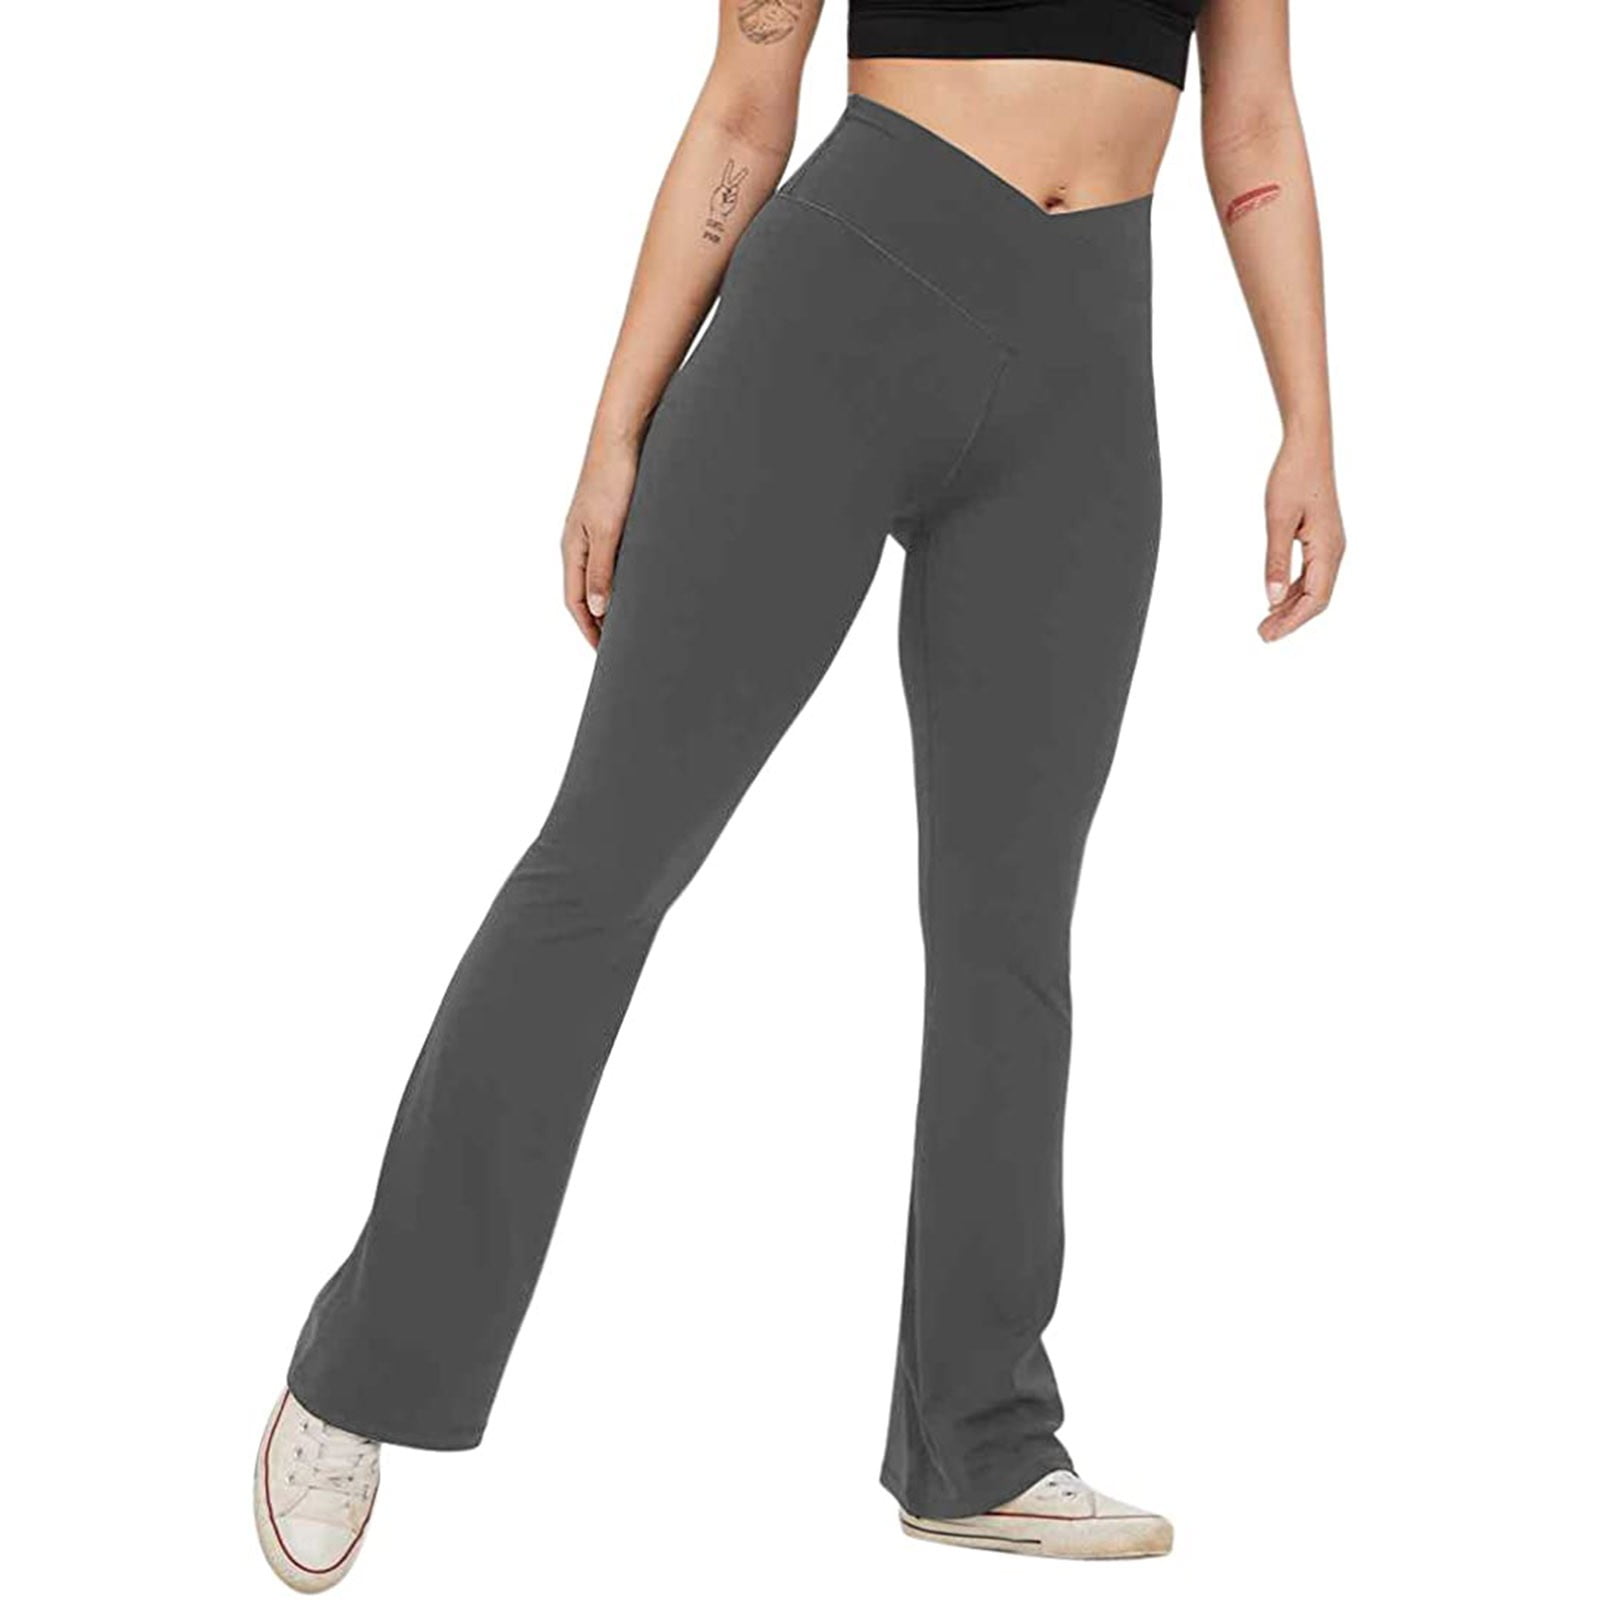 LL Womens Flare Yoga Pants With Soft Strap, Split Hem, And High Waist  Support For Indoor/Outdoor Fitness Slim Fit, Show Legs, Hip Lift, Solid  Color Leggings S5 From Dzclothes413, $12.11